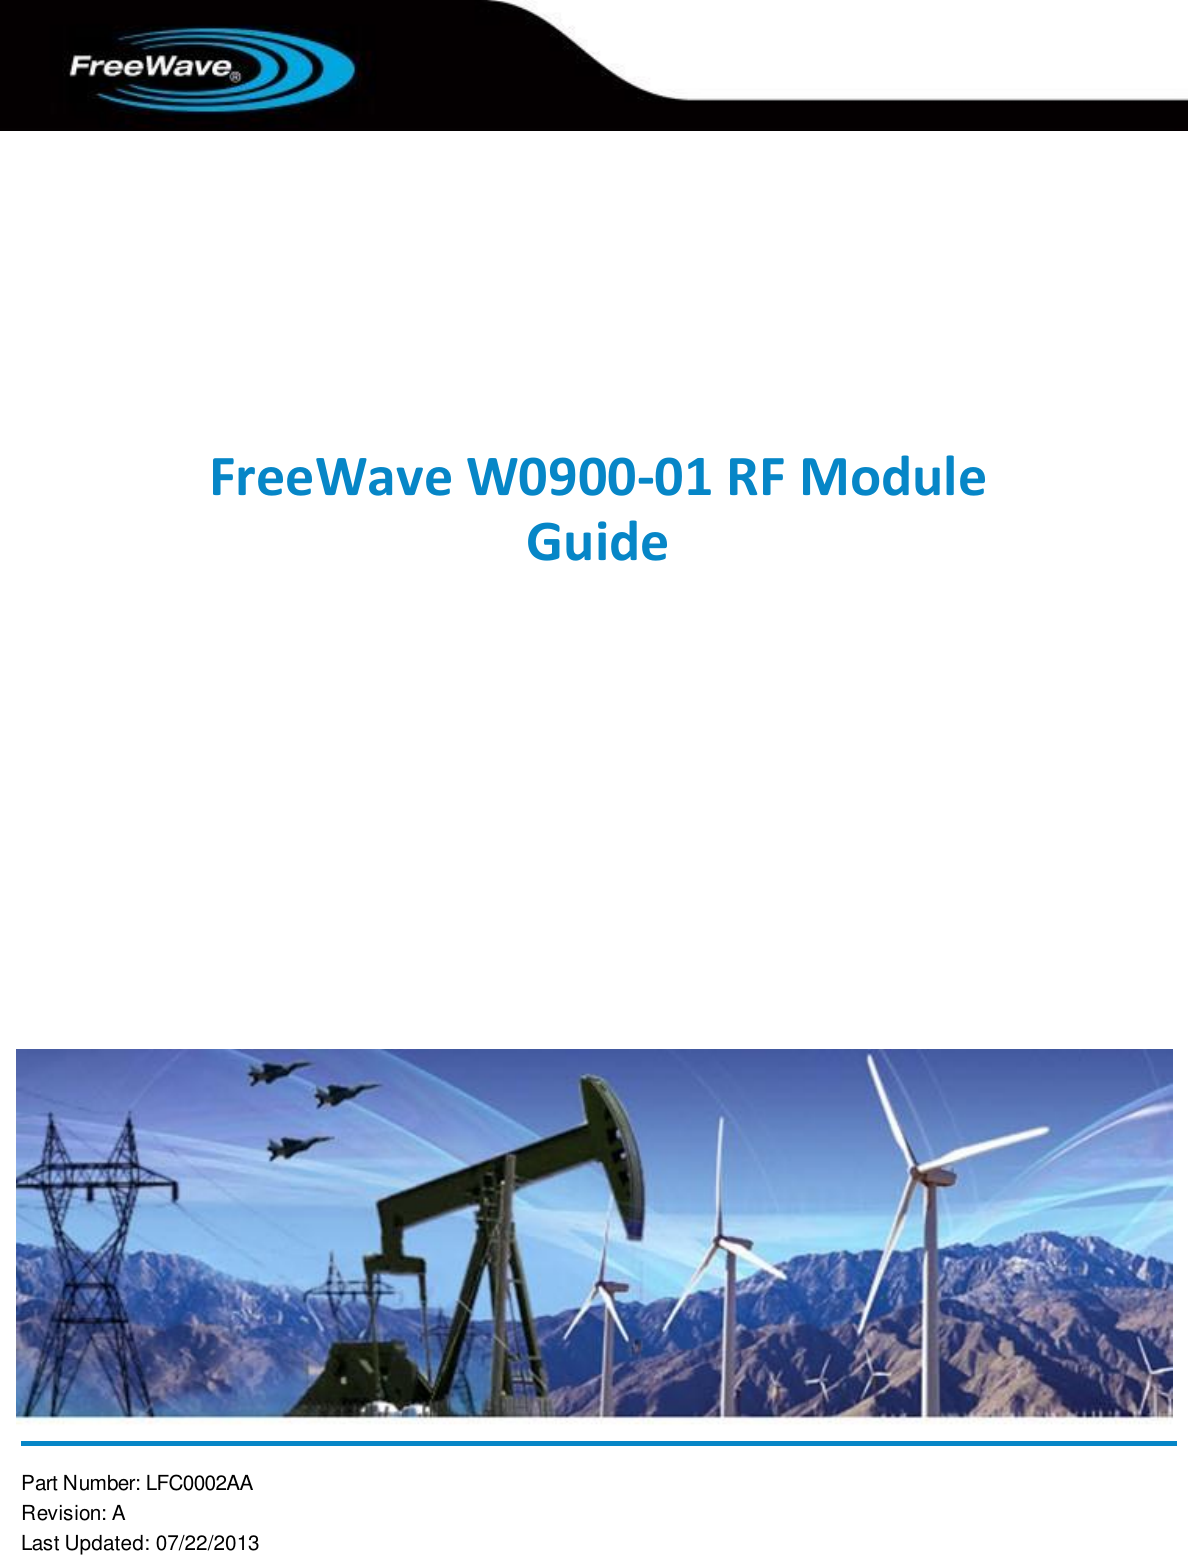  Part Number: LFC0002AA Revision: A Last Updated: 07/22/2013    FreeWave W0900-01 RF Module Guide  